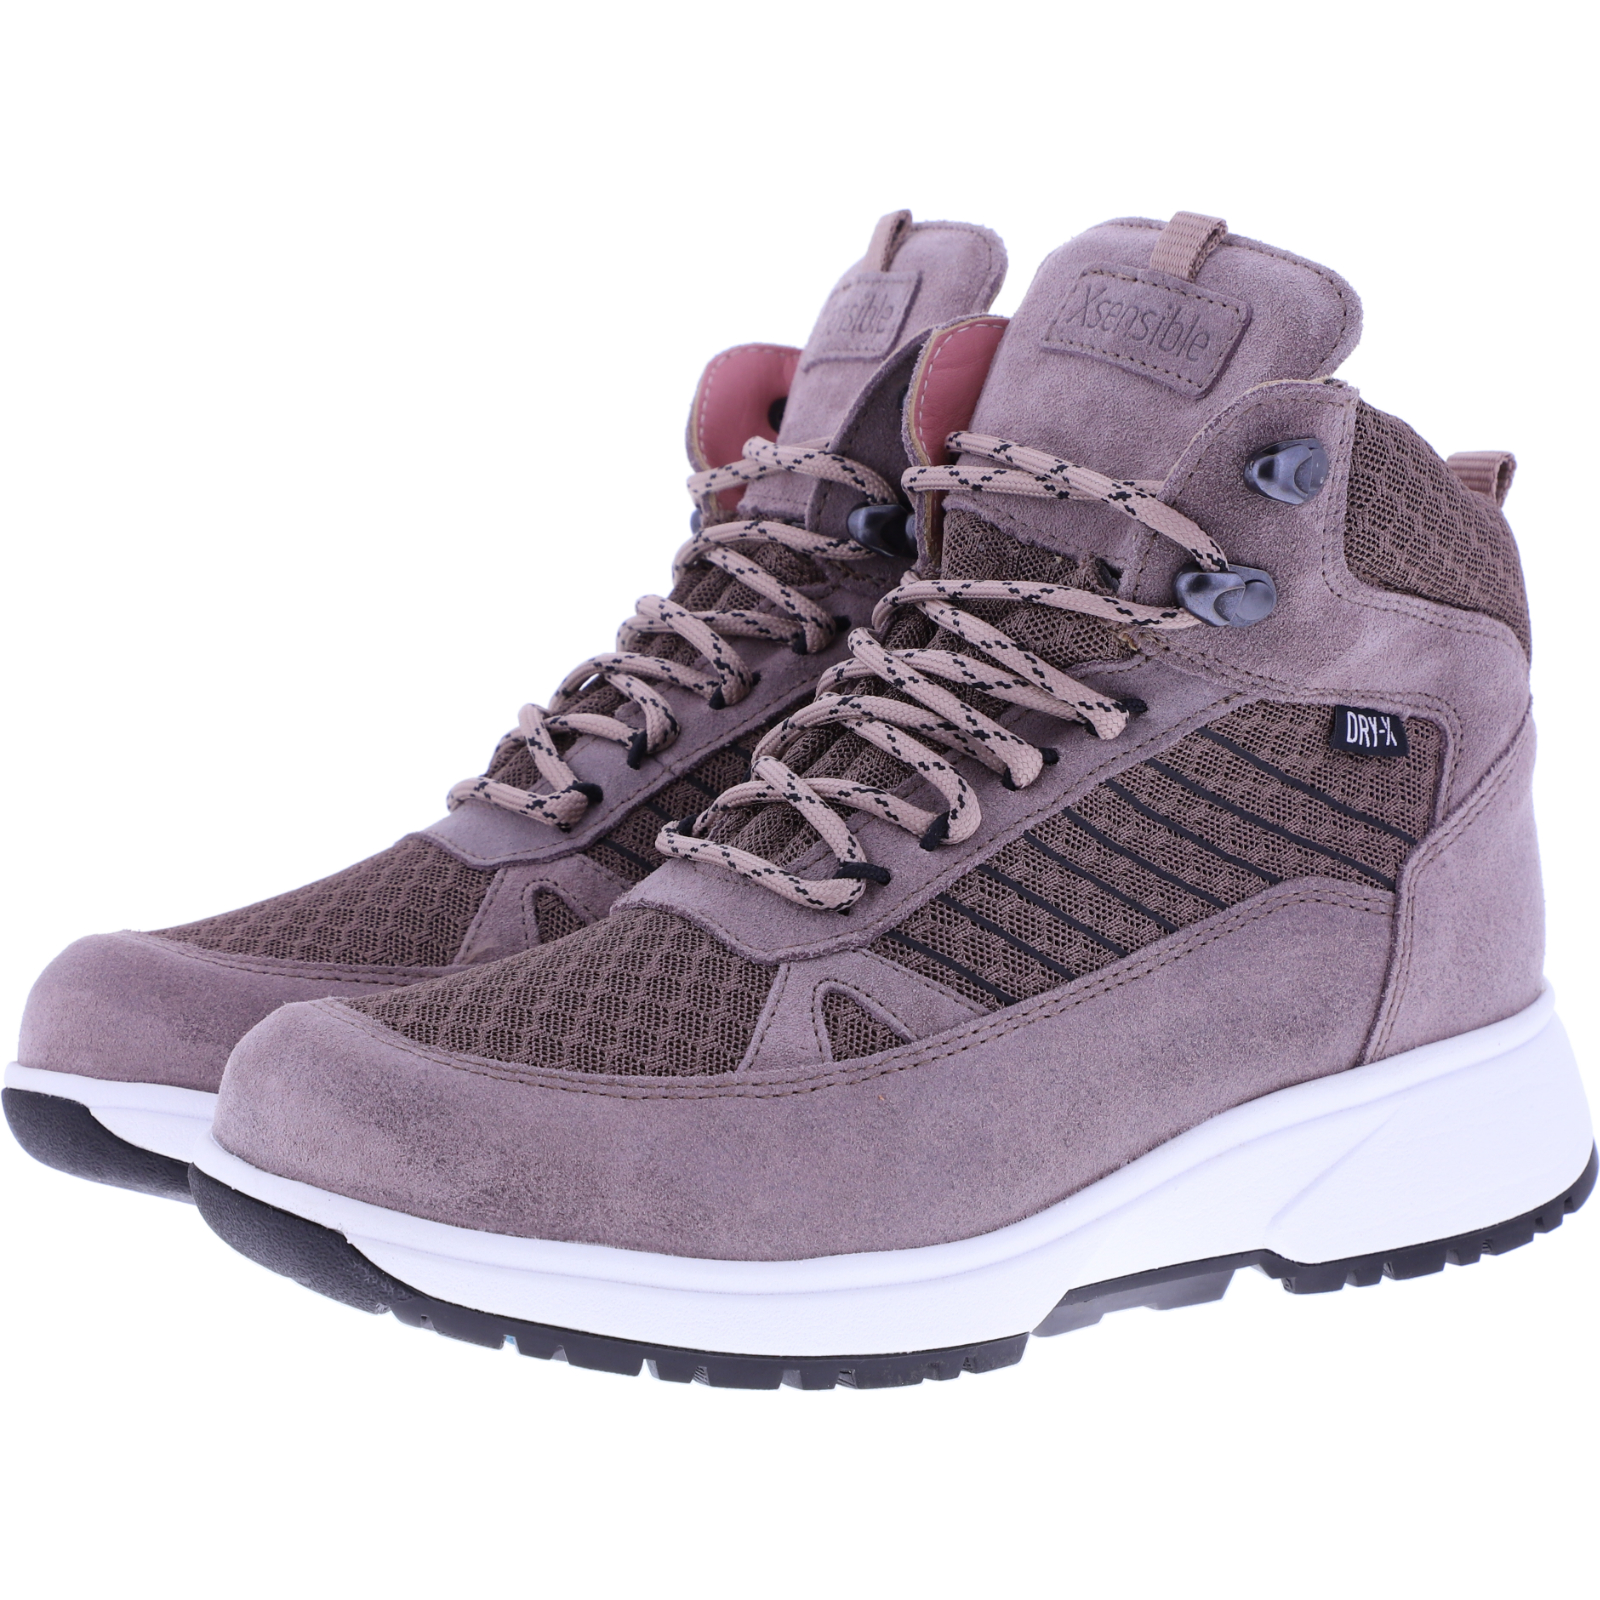 Xsensible Stretchwalker / Modell: Oulo / Cinder Rose Dry-X / Art: 402075-780 / Hiking Stiefeletten